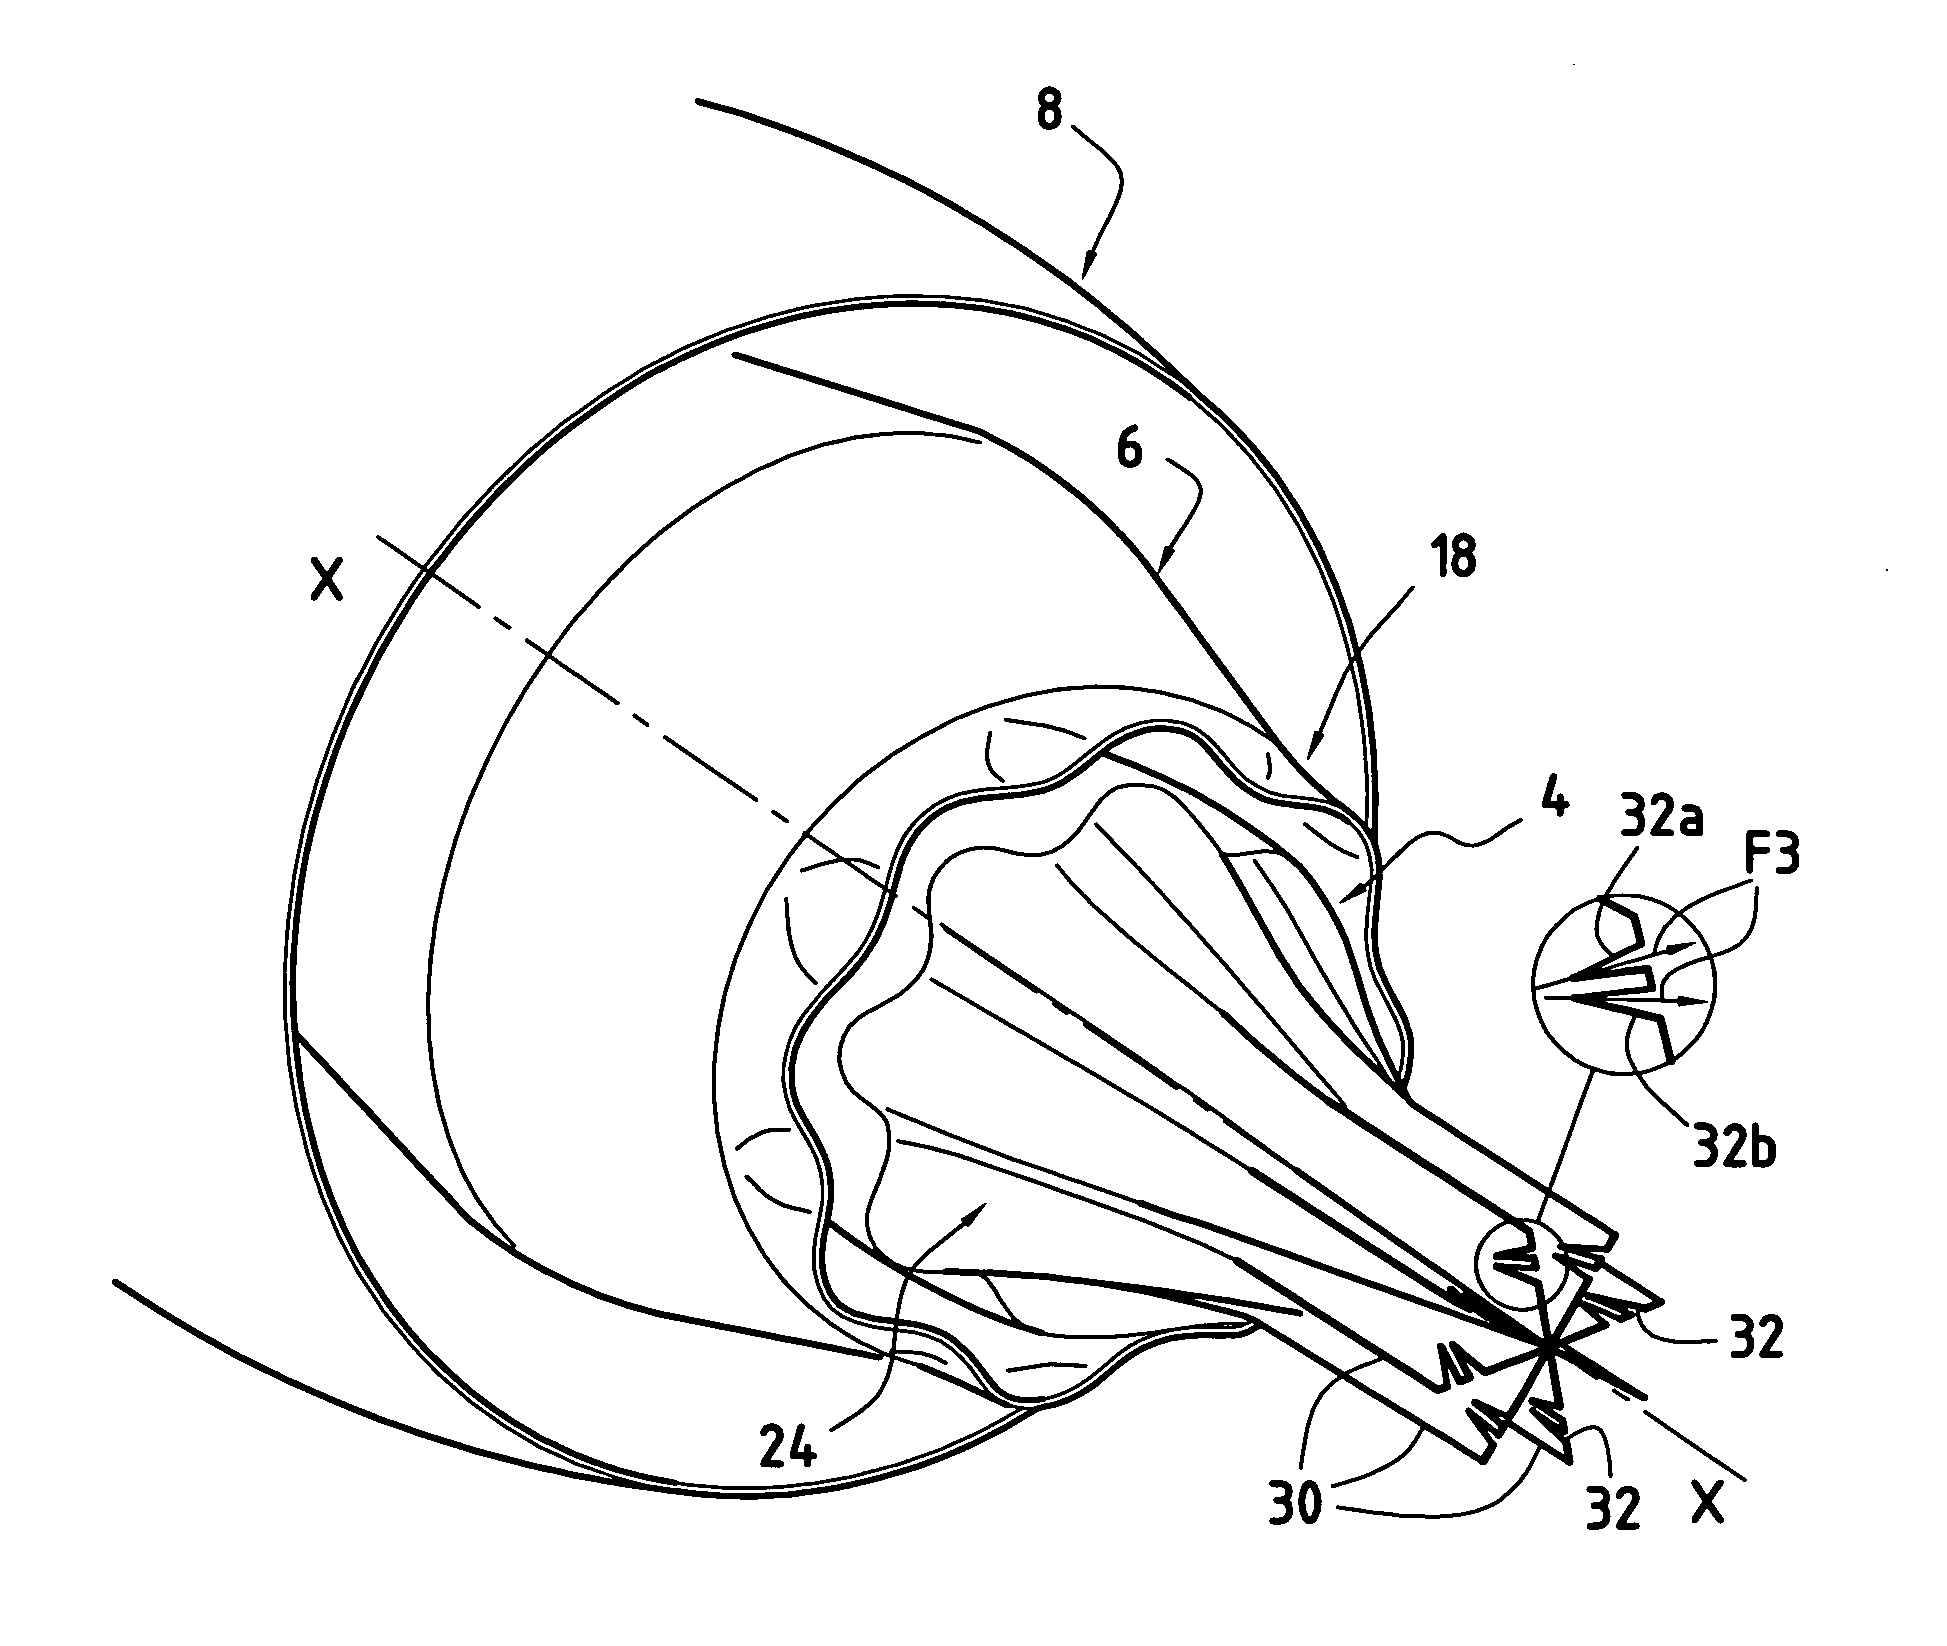 Turbomachine nozzle with noise reduction